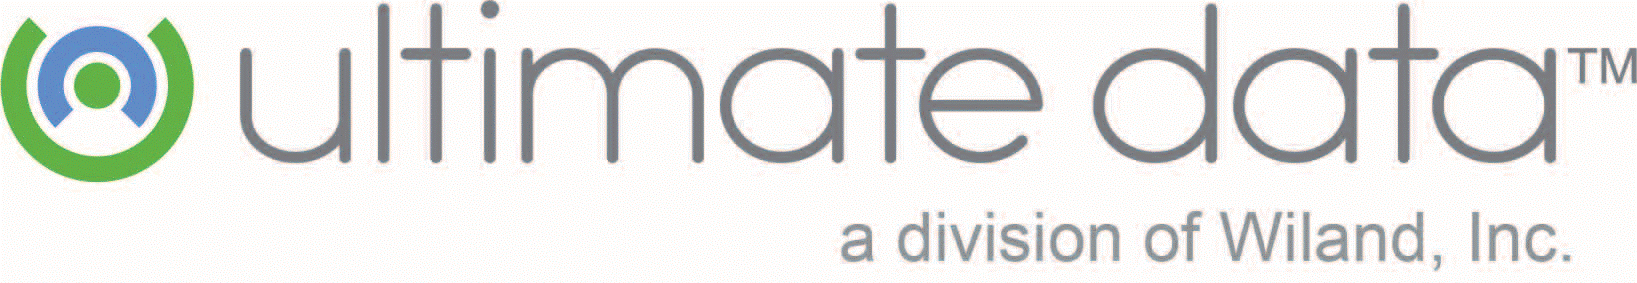 Ultimate Data, a Division of Wiland, Inc logo